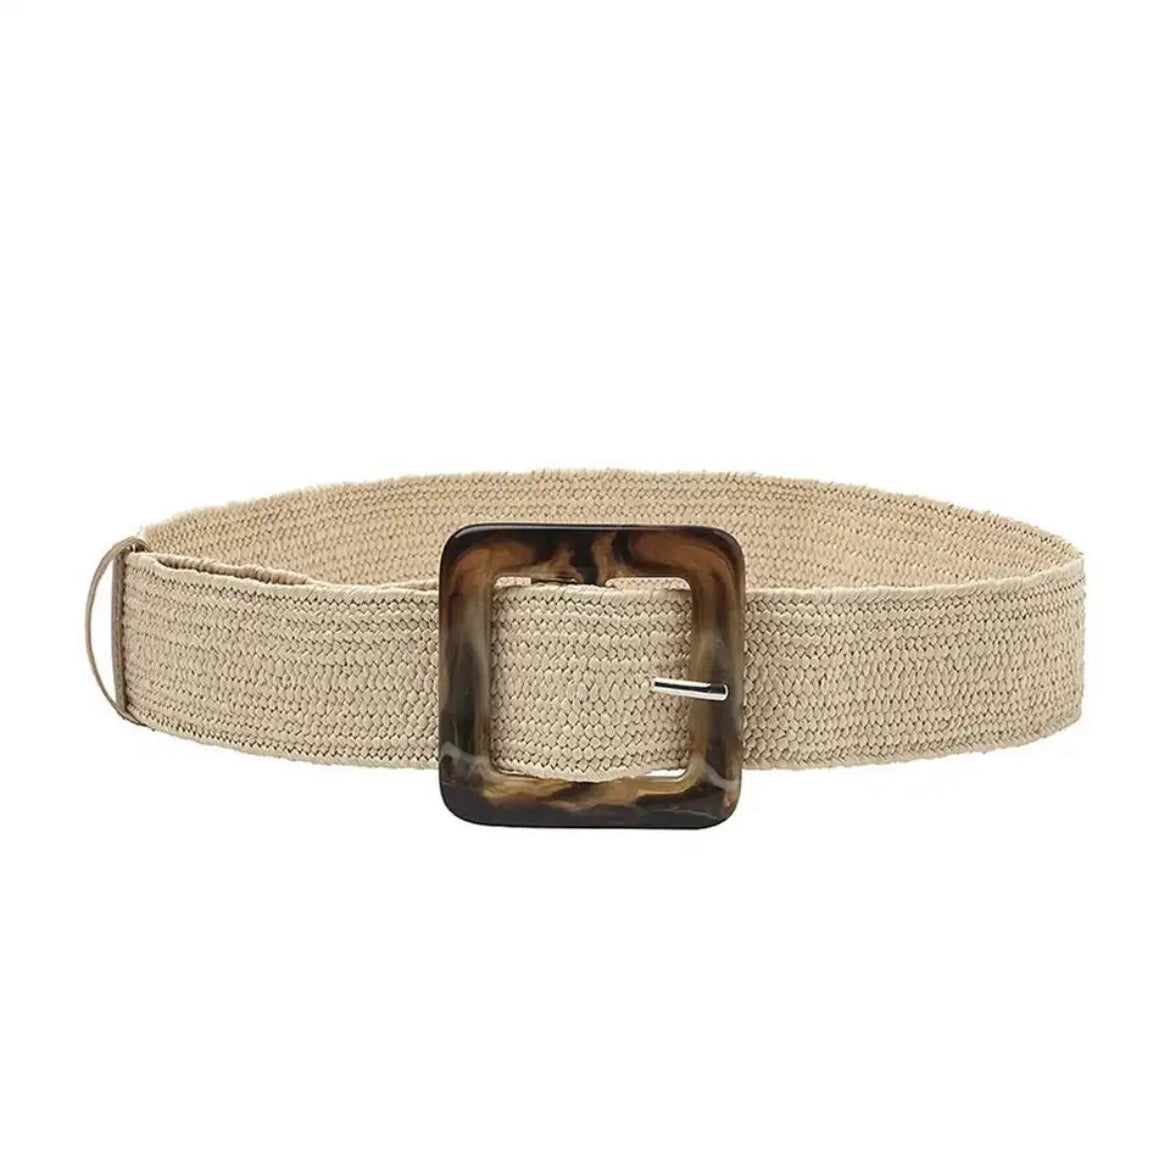 Stretch woven raffia waist belt with bold resin buckle in light sand